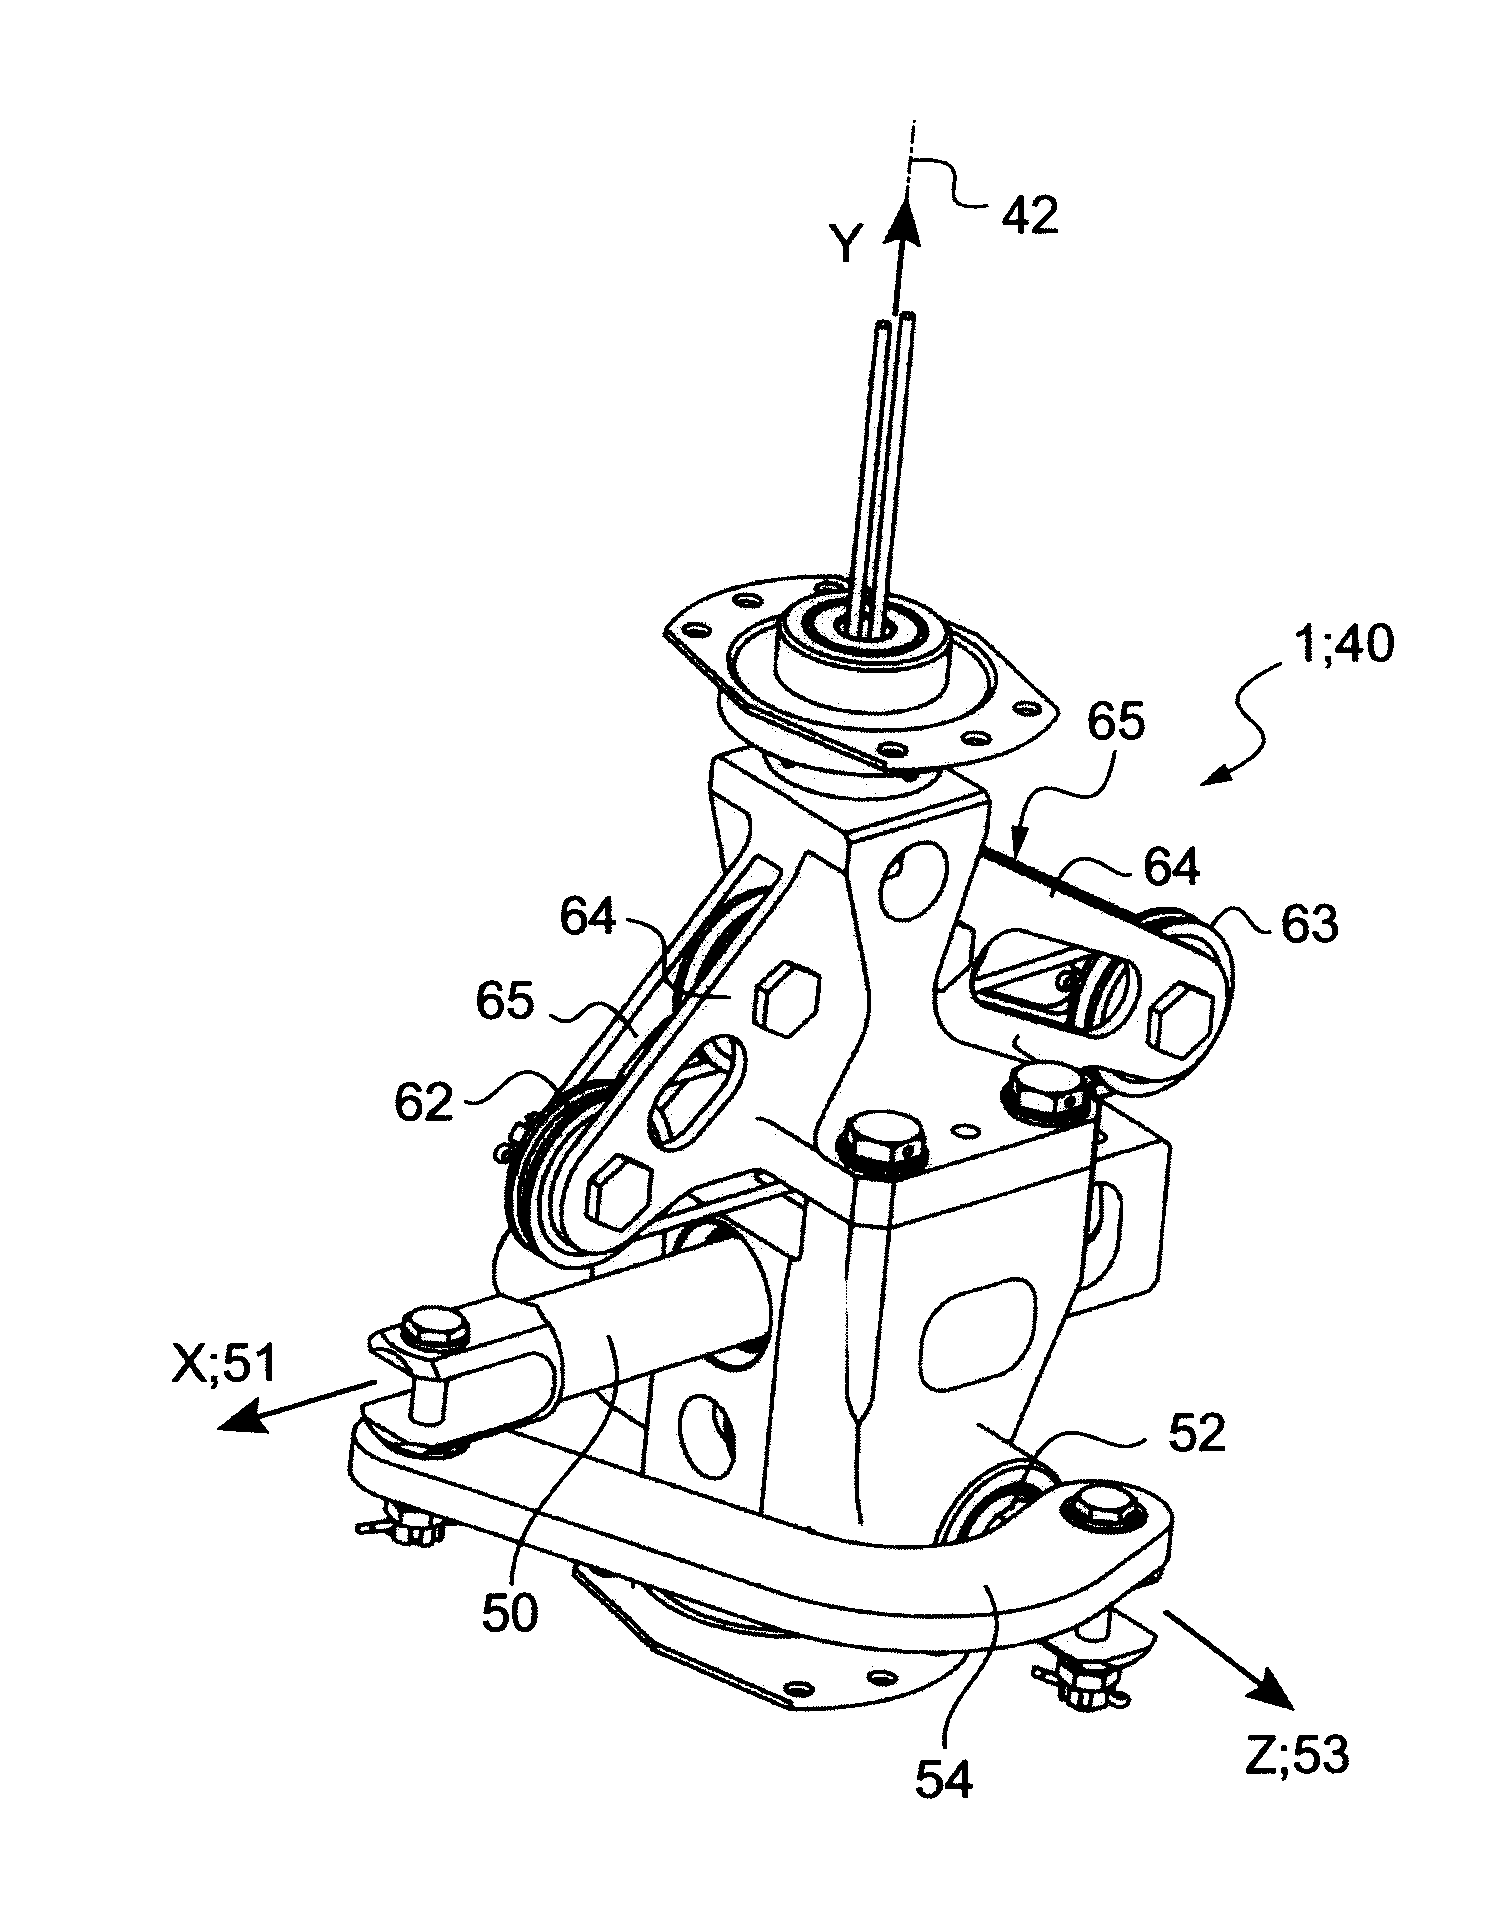 Variable ratio crank for a manual flight control linkage of a rotary wing aircraft